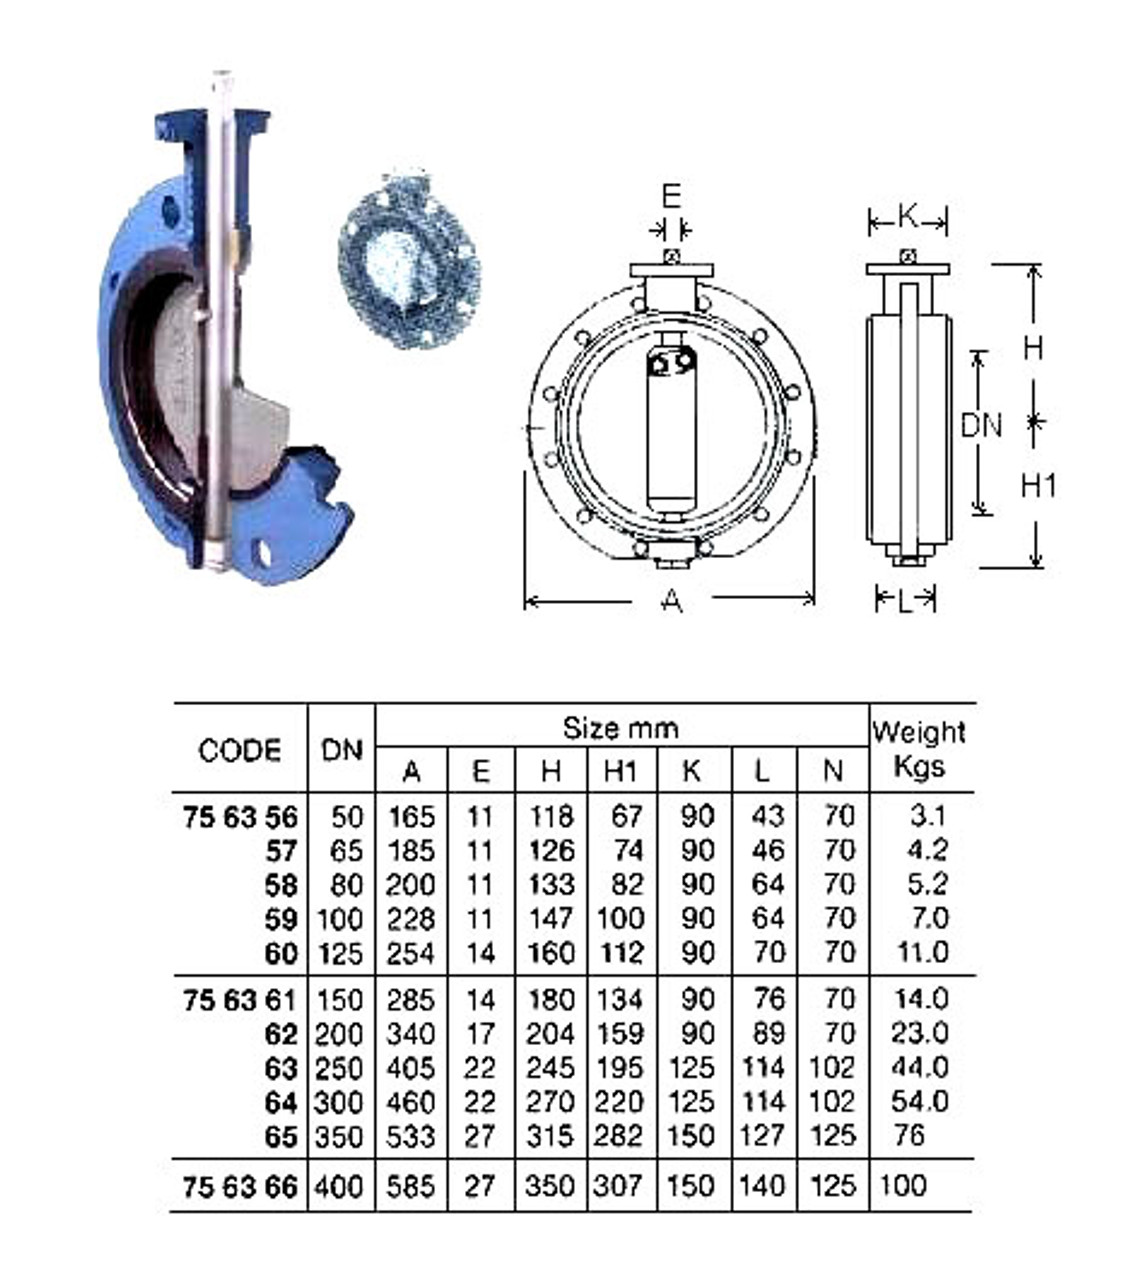 IMPA 756357 Monoflange Butterfly Valve - Ductile Iron - Bronze Disc - NBR Seat - DIN PN10/16 - long serie - lever operated 65